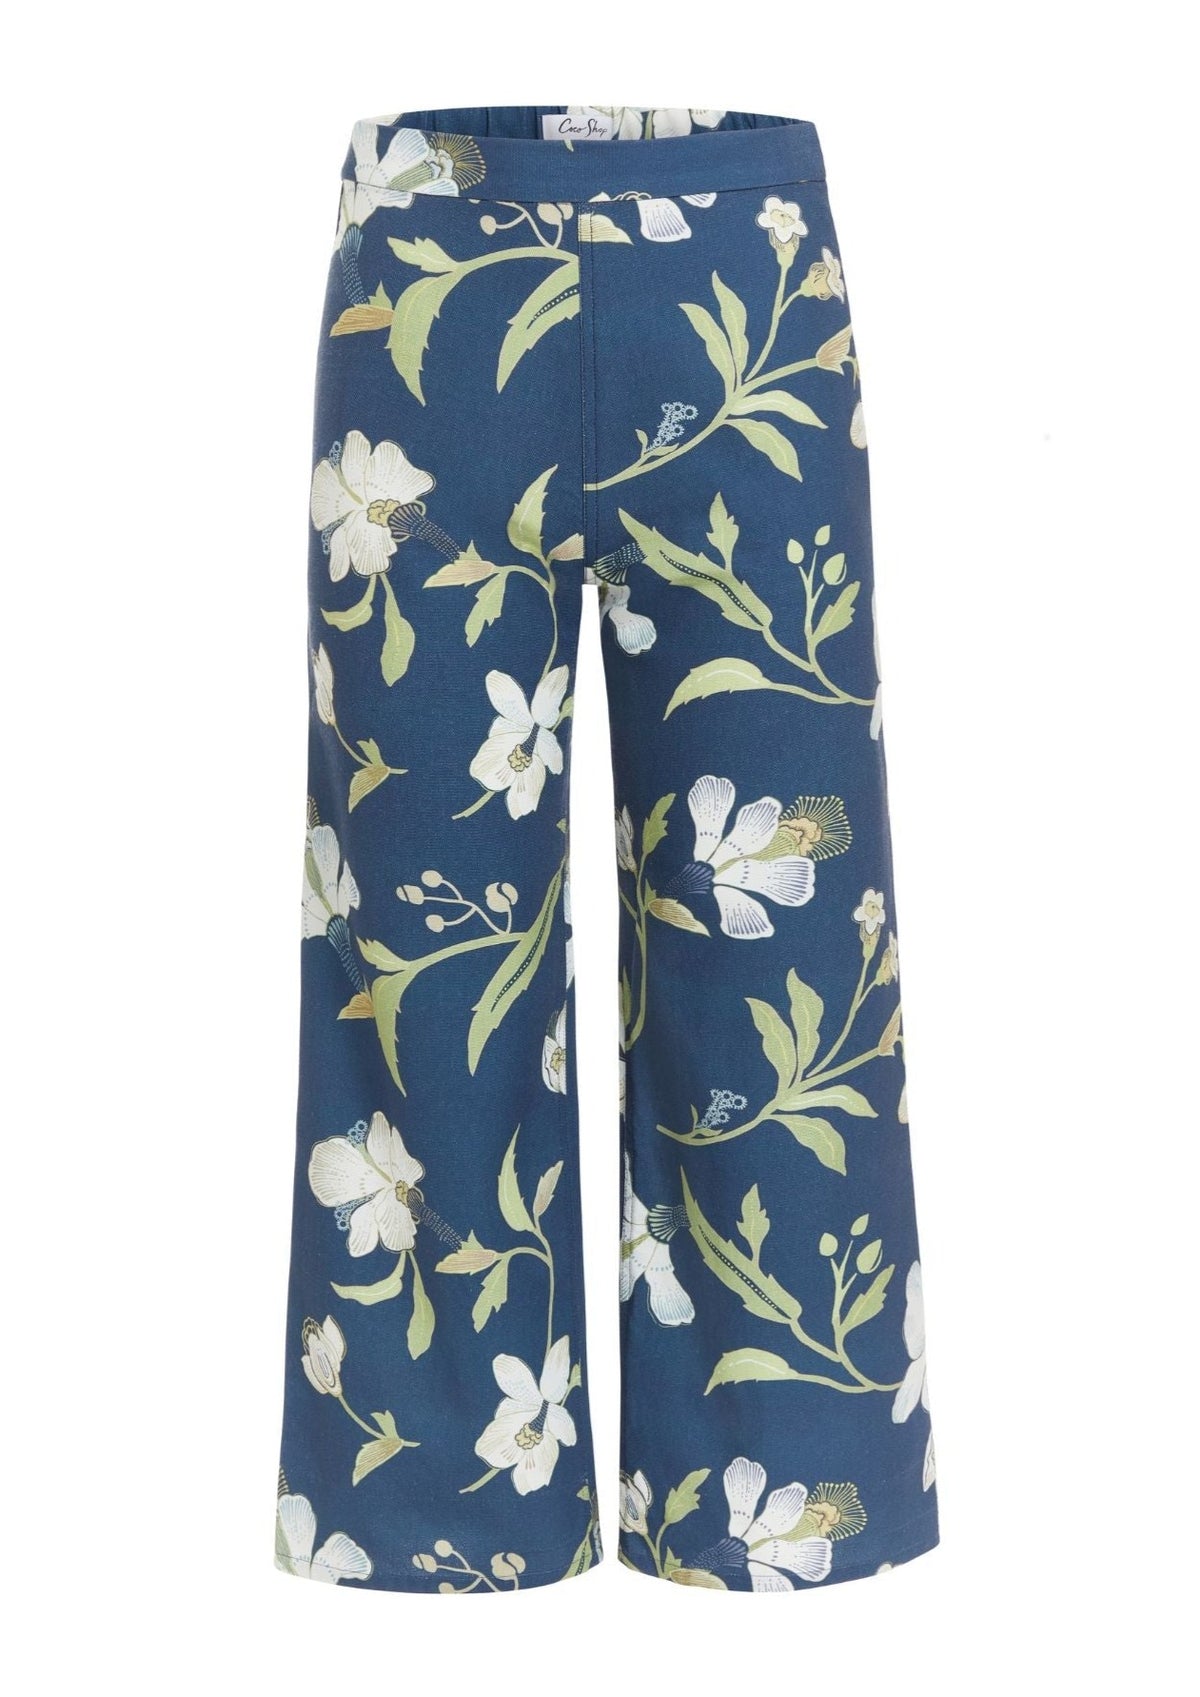 High-Waisted, Wide-Leg Pants in Navy Hibiscus